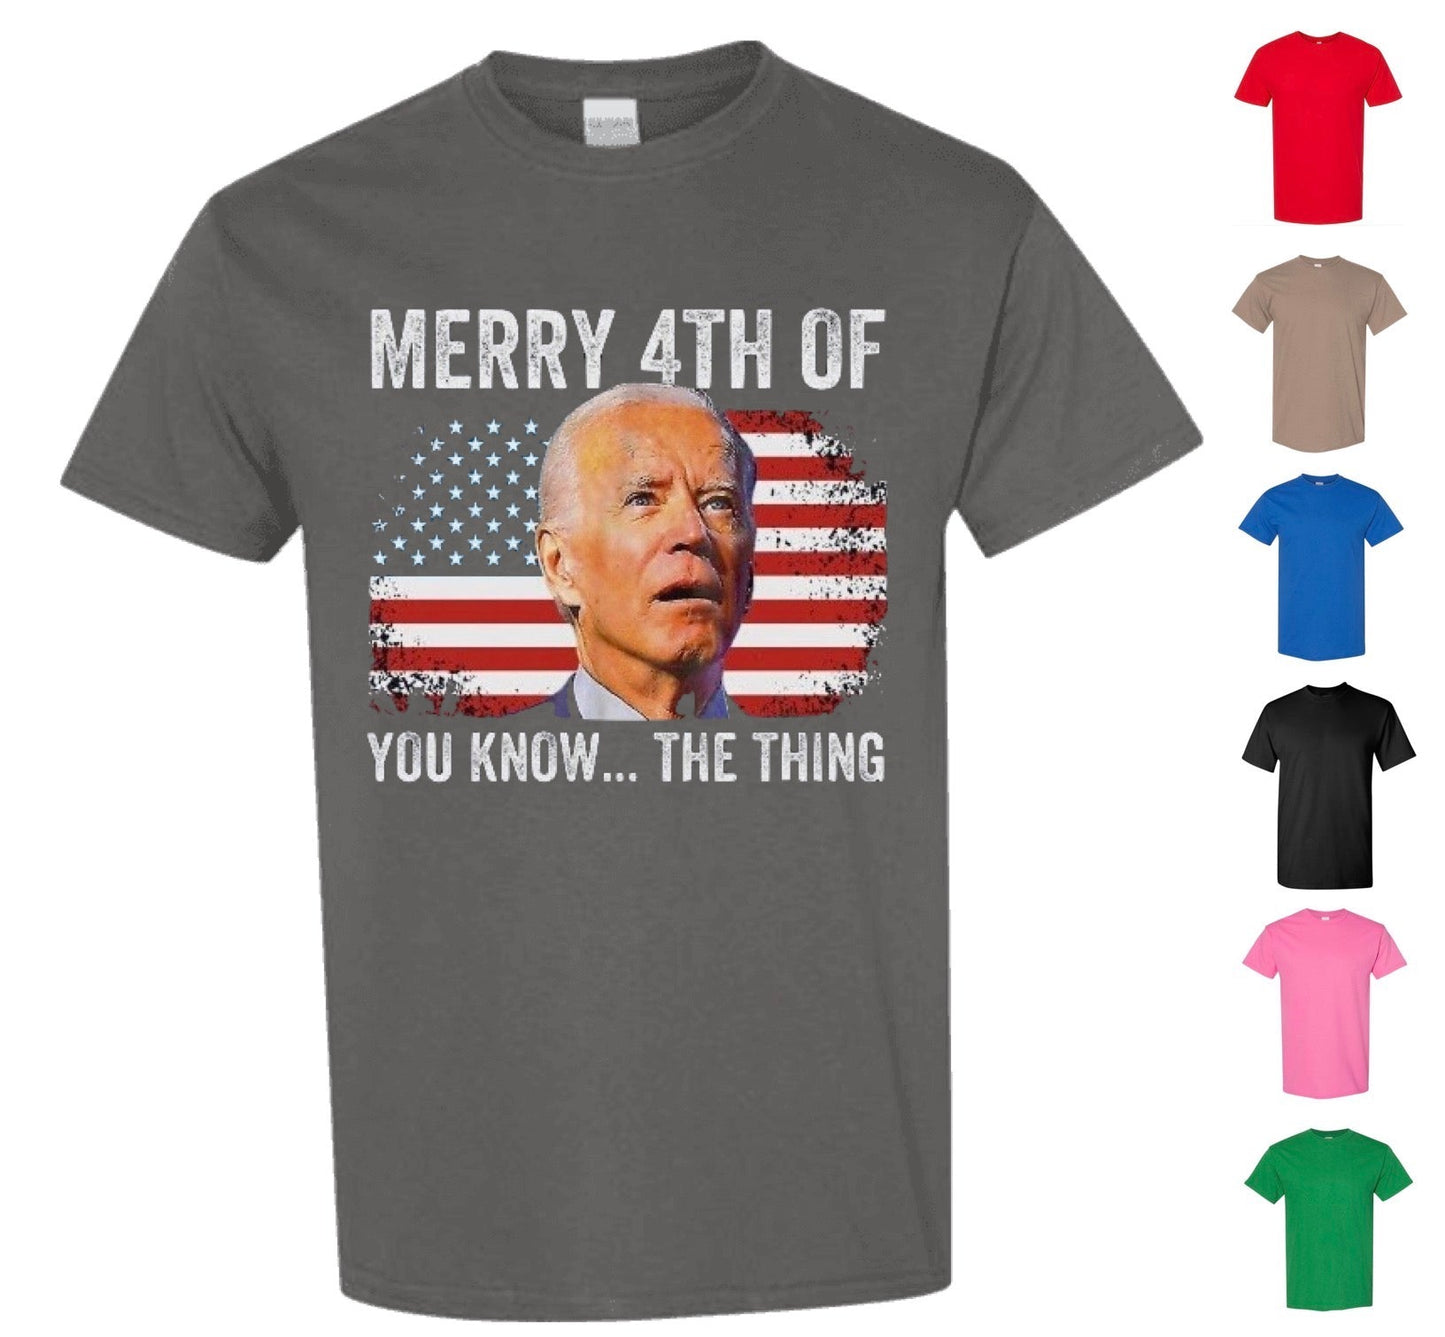 Merry 4th of You Know The Thing! (Free Shipping)